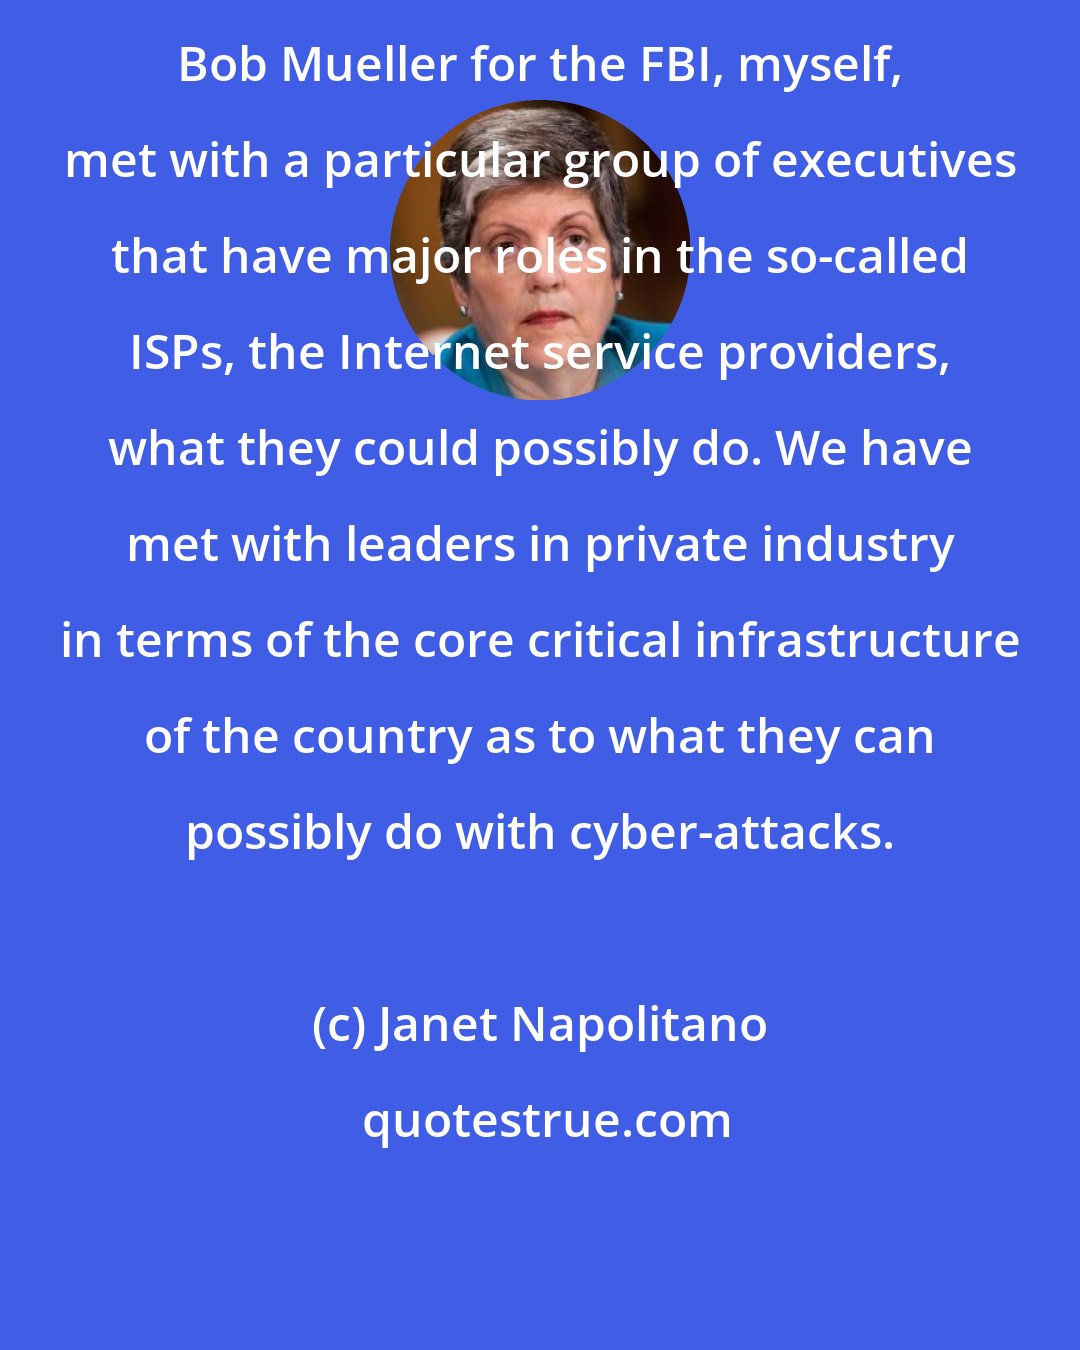 Janet Napolitano: Bob Mueller for the FBI, myself, met with a particular group of executives that have major roles in the so-called ISPs, the Internet service providers, what they could possibly do. We have met with leaders in private industry in terms of the core critical infrastructure of the country as to what they can possibly do with cyber-attacks.